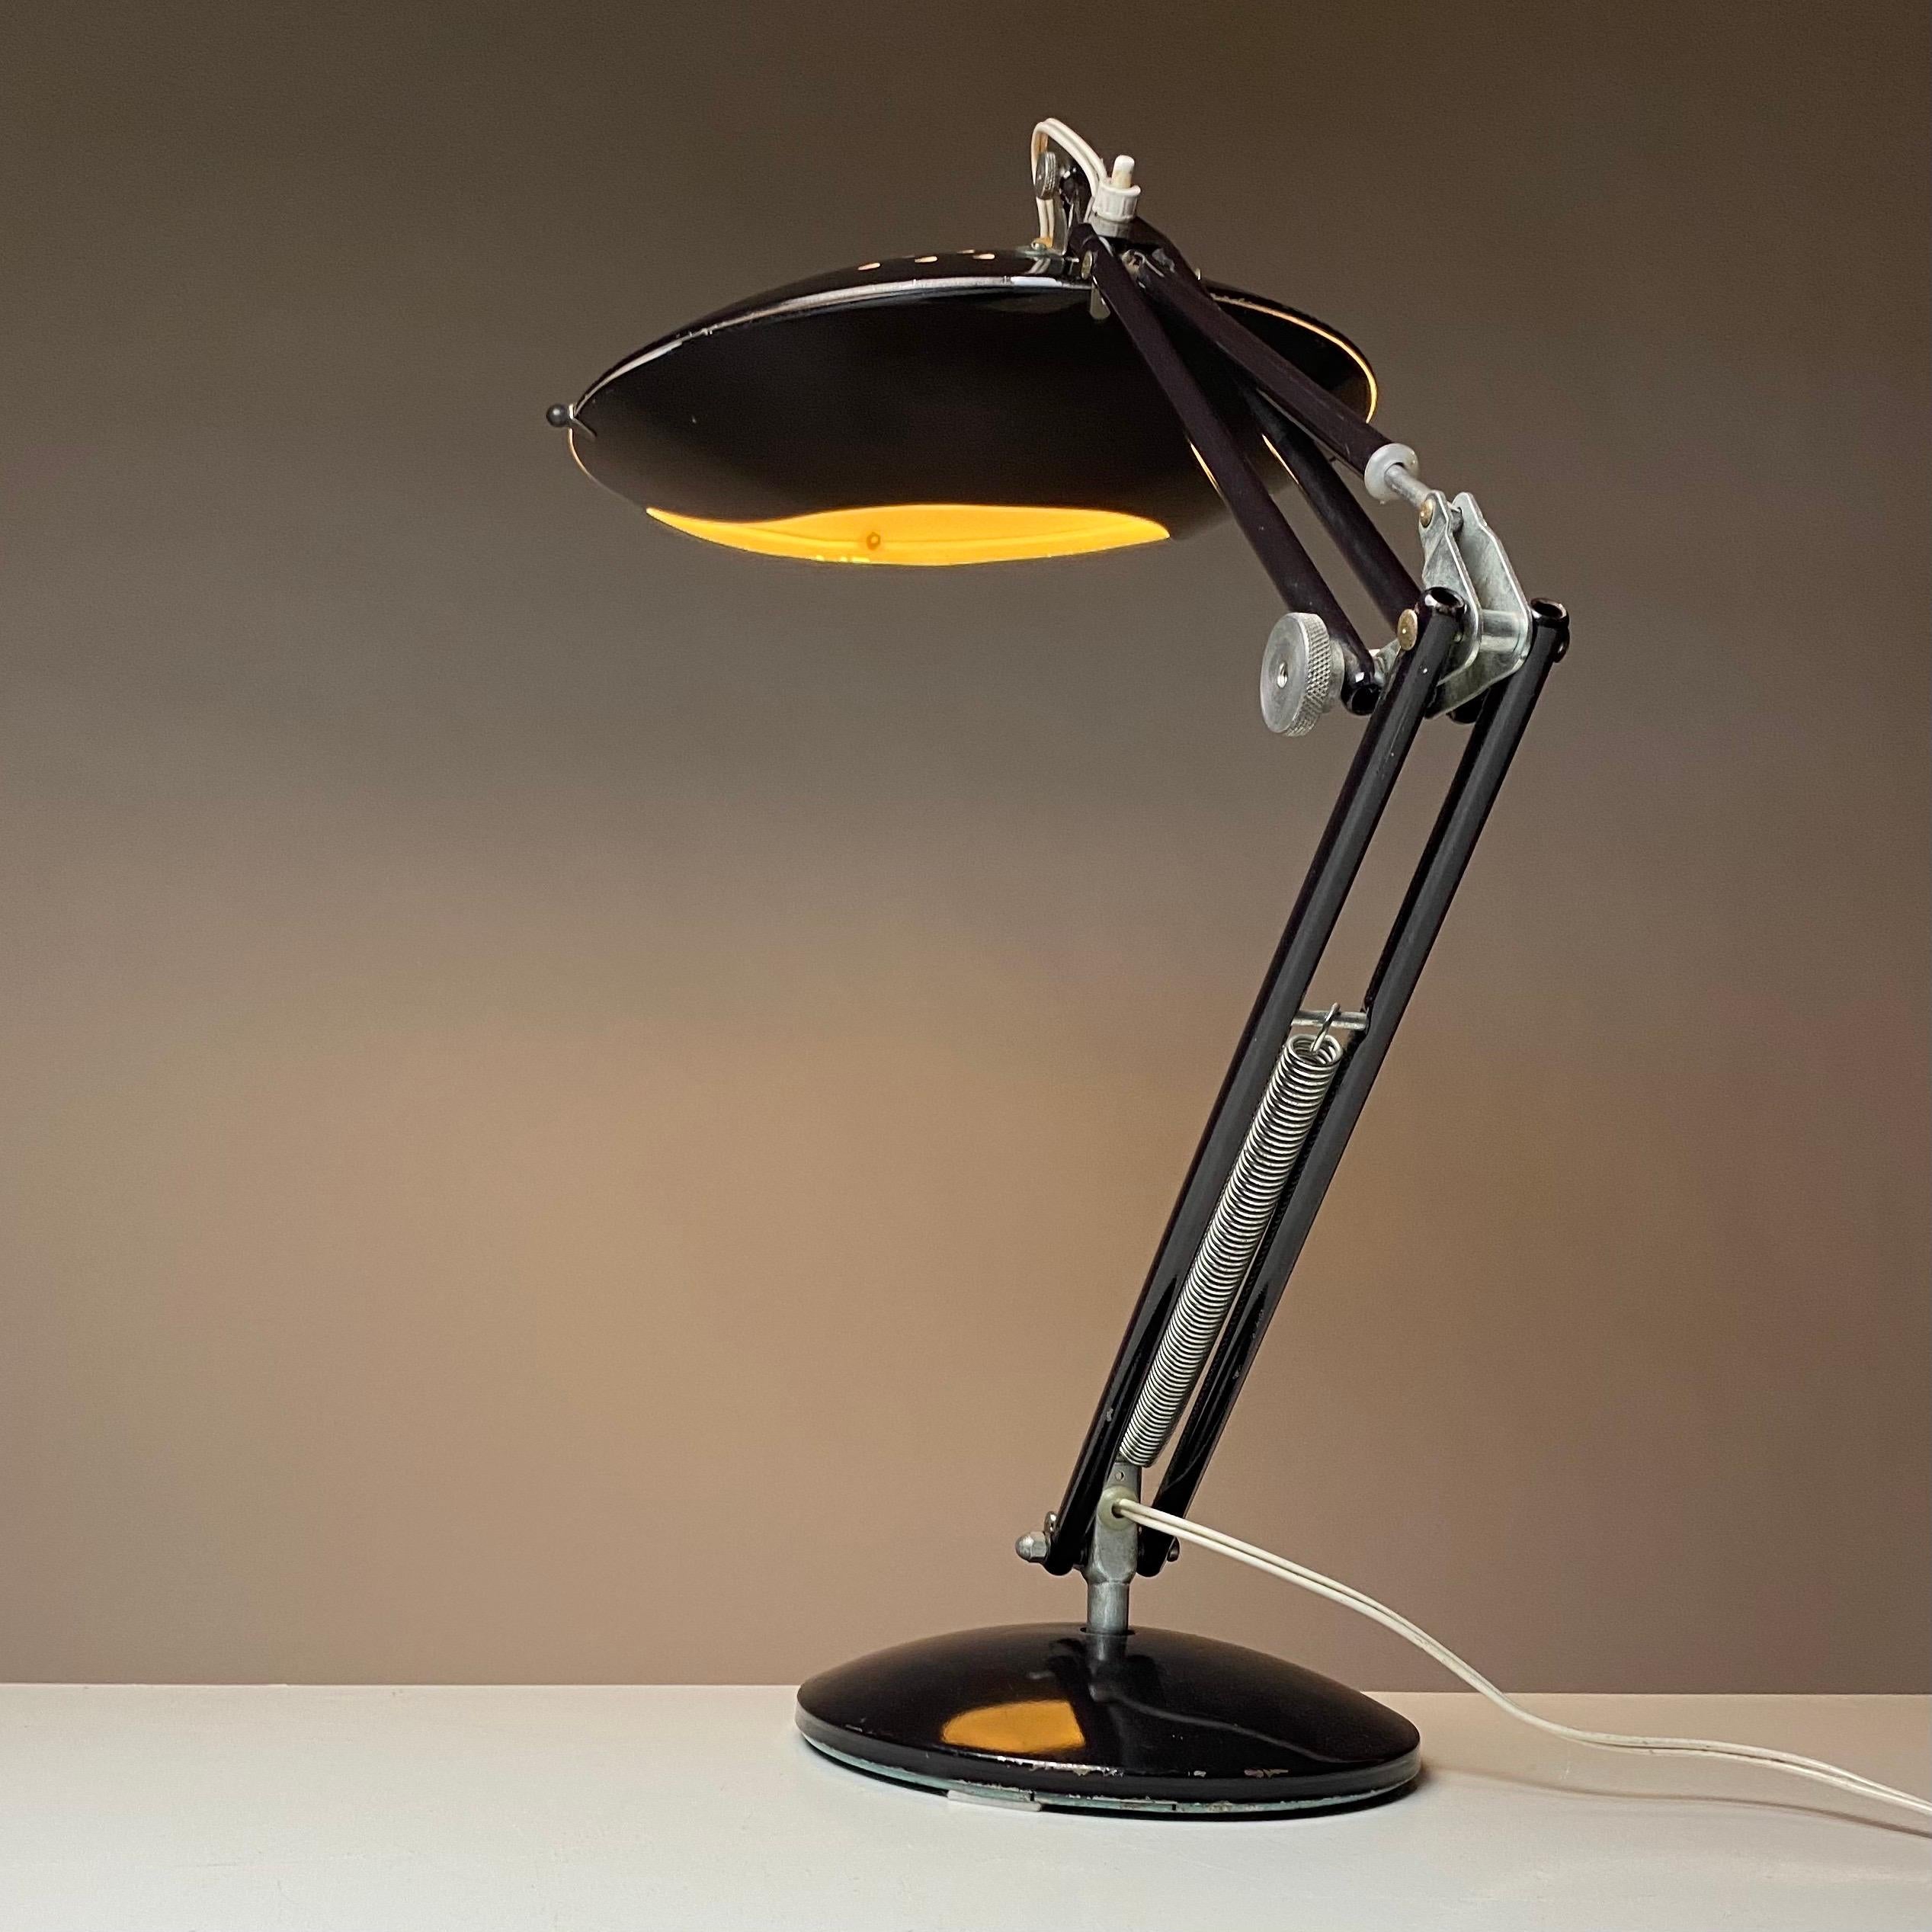 Now here is something for you who are looking for rare cool collectables or just want something no one else has. 

Aluminor desk lamp french design with both treads from atomic and space age and in the high quality which Aluminor has always been